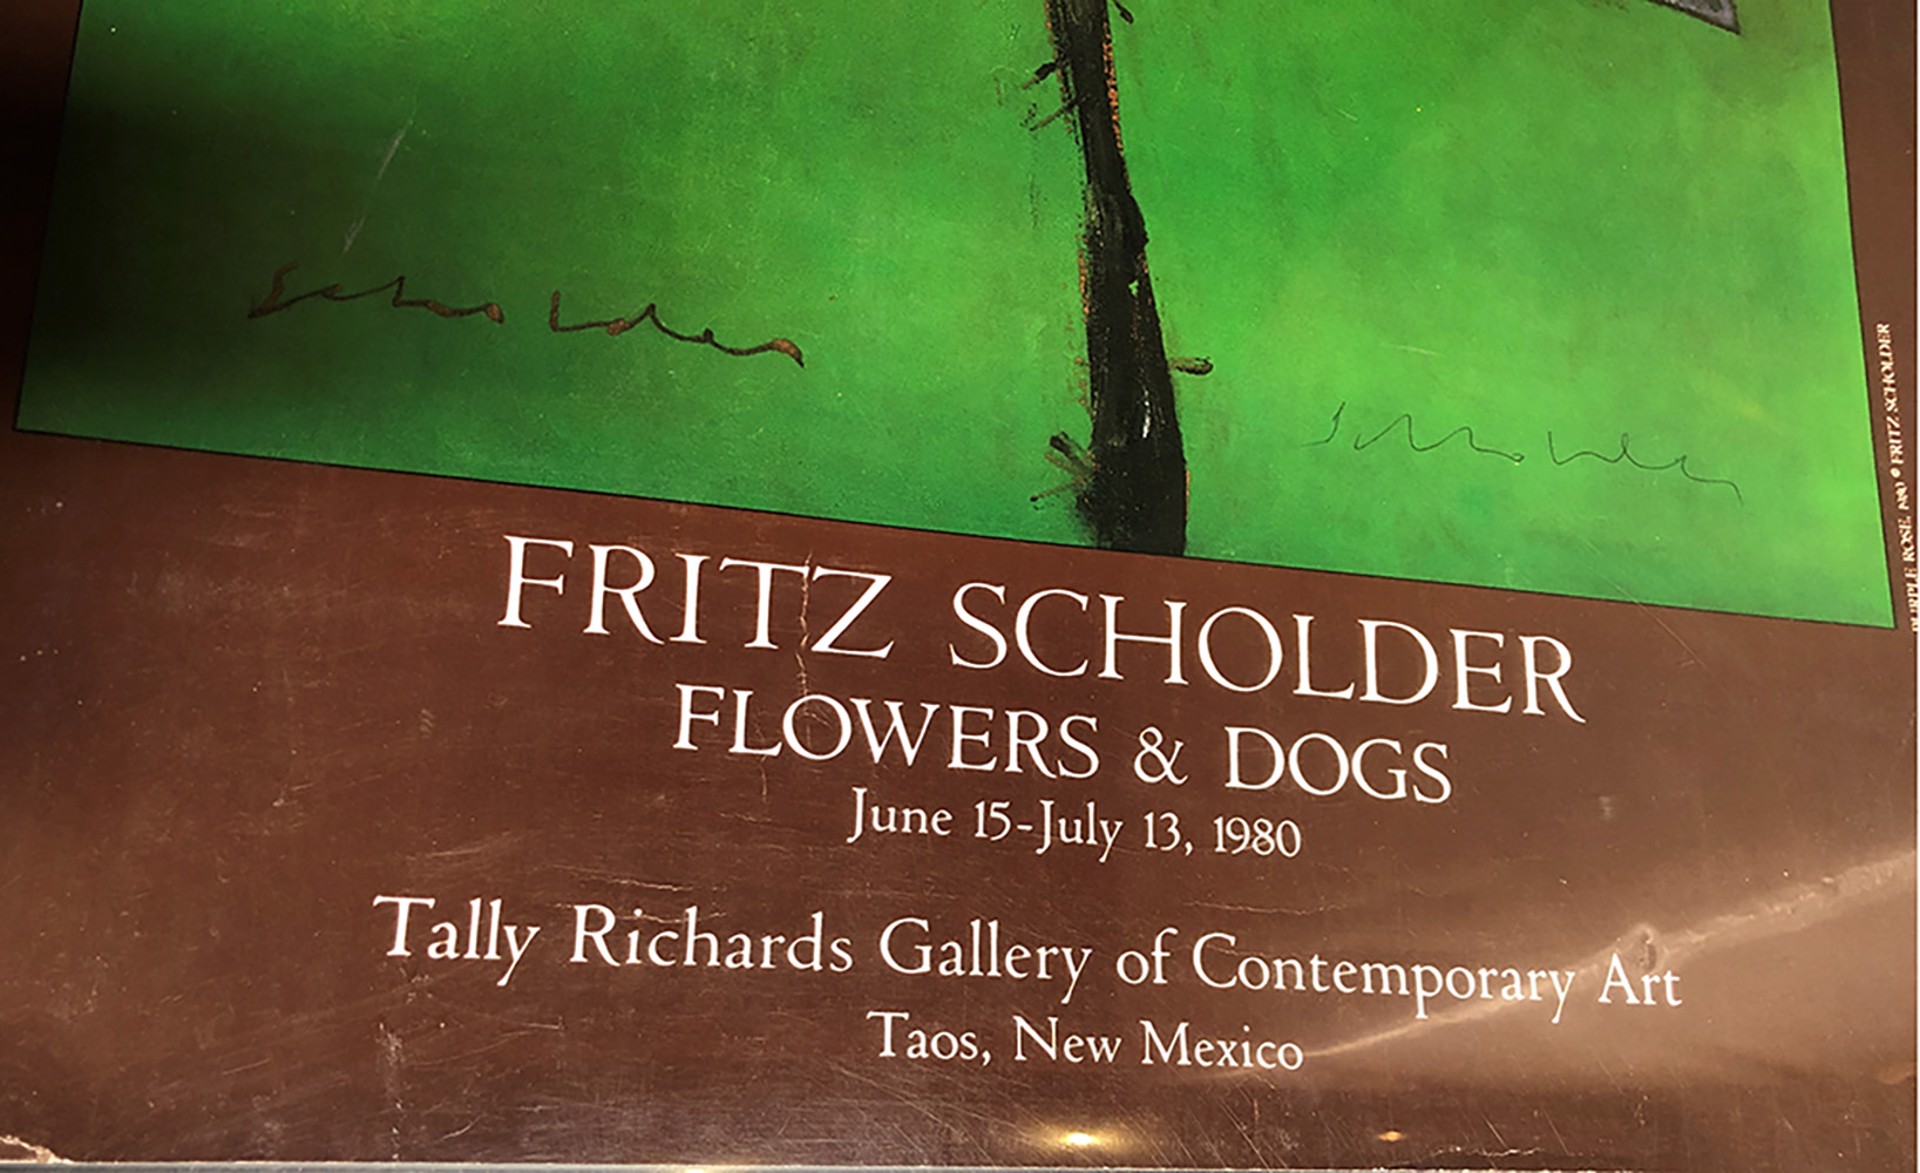 Tally Richards Gallery of Contemporary Art (Flowers & Dogs) by Fritz Scholder